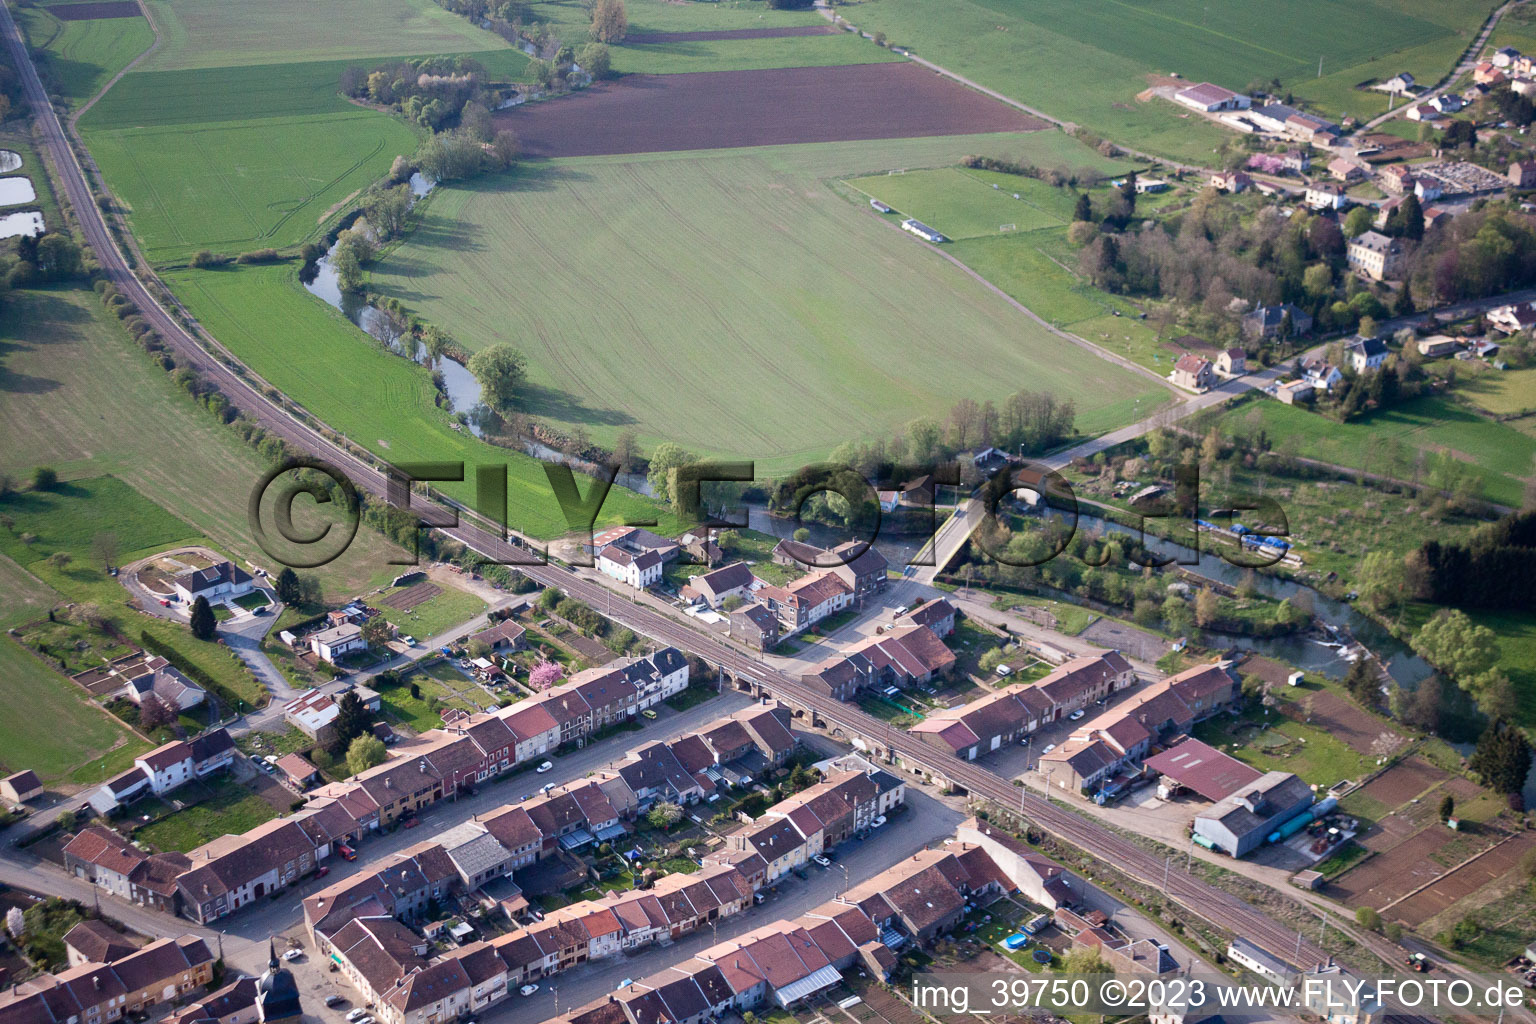 Aerial view of Charency-Vezin in the state Meurthe et Moselle, France